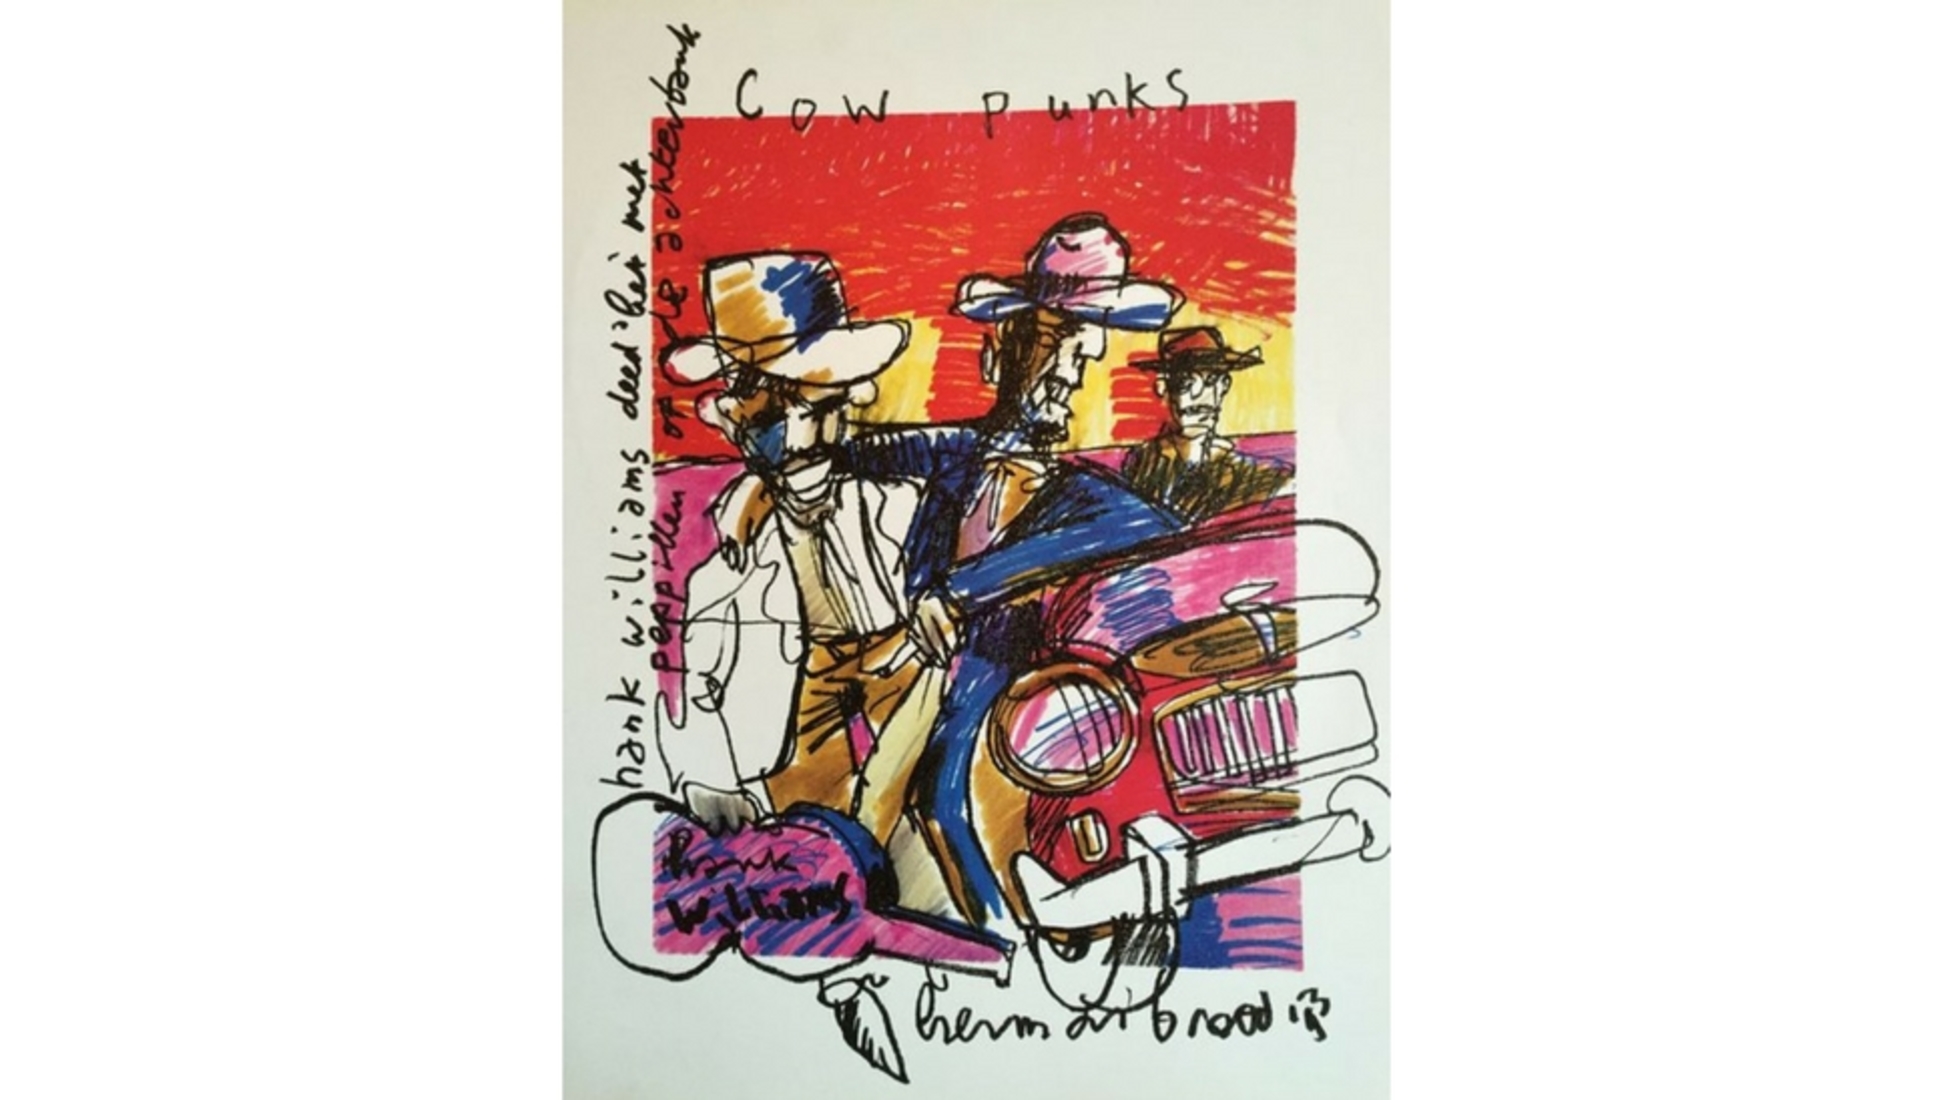 A lithograph by Herman Brood, made with multiple colours